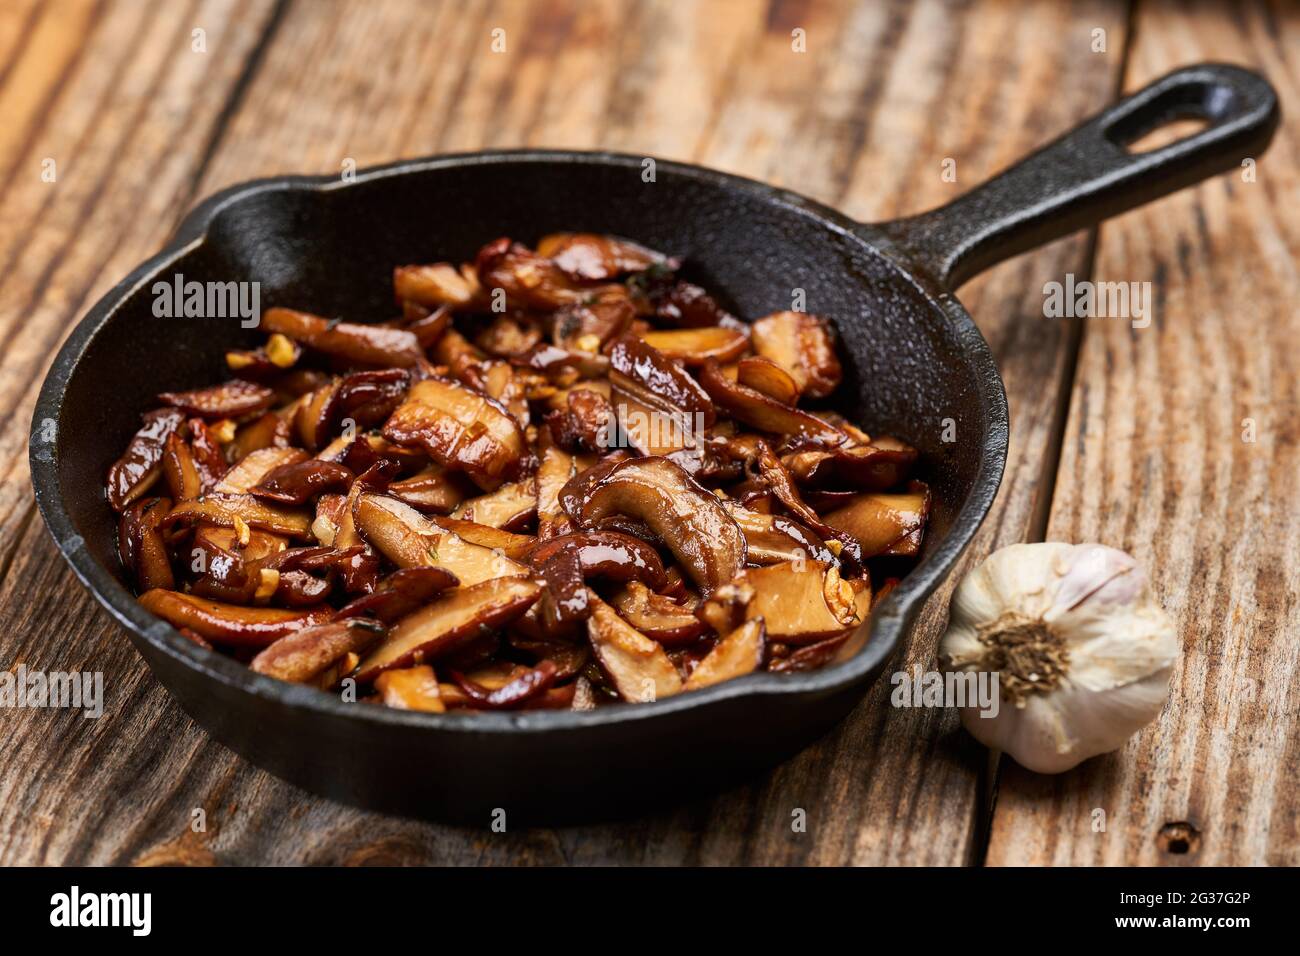 Sauteed cep (bolete) wild mushrooms with garlic and herbs in the frying pan Stock Photo